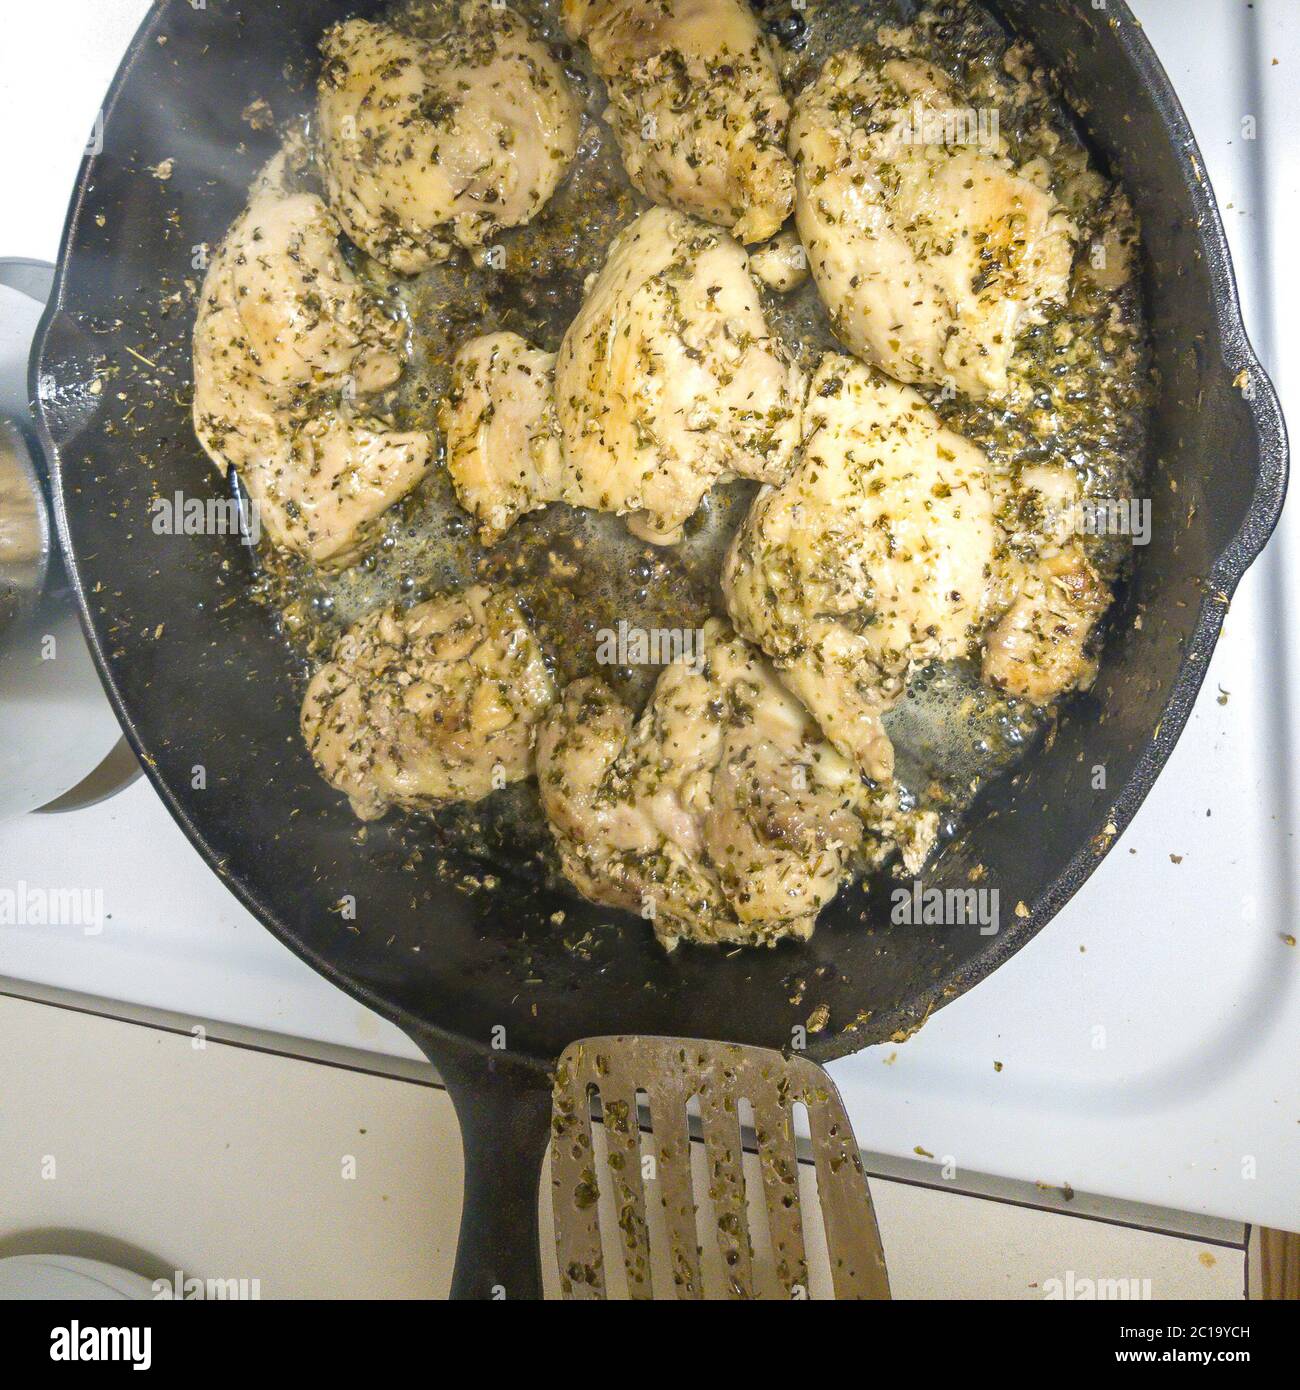 Square Slices of chicken meat with green herbs cooking on a hot cast iron skillet Stock Photo